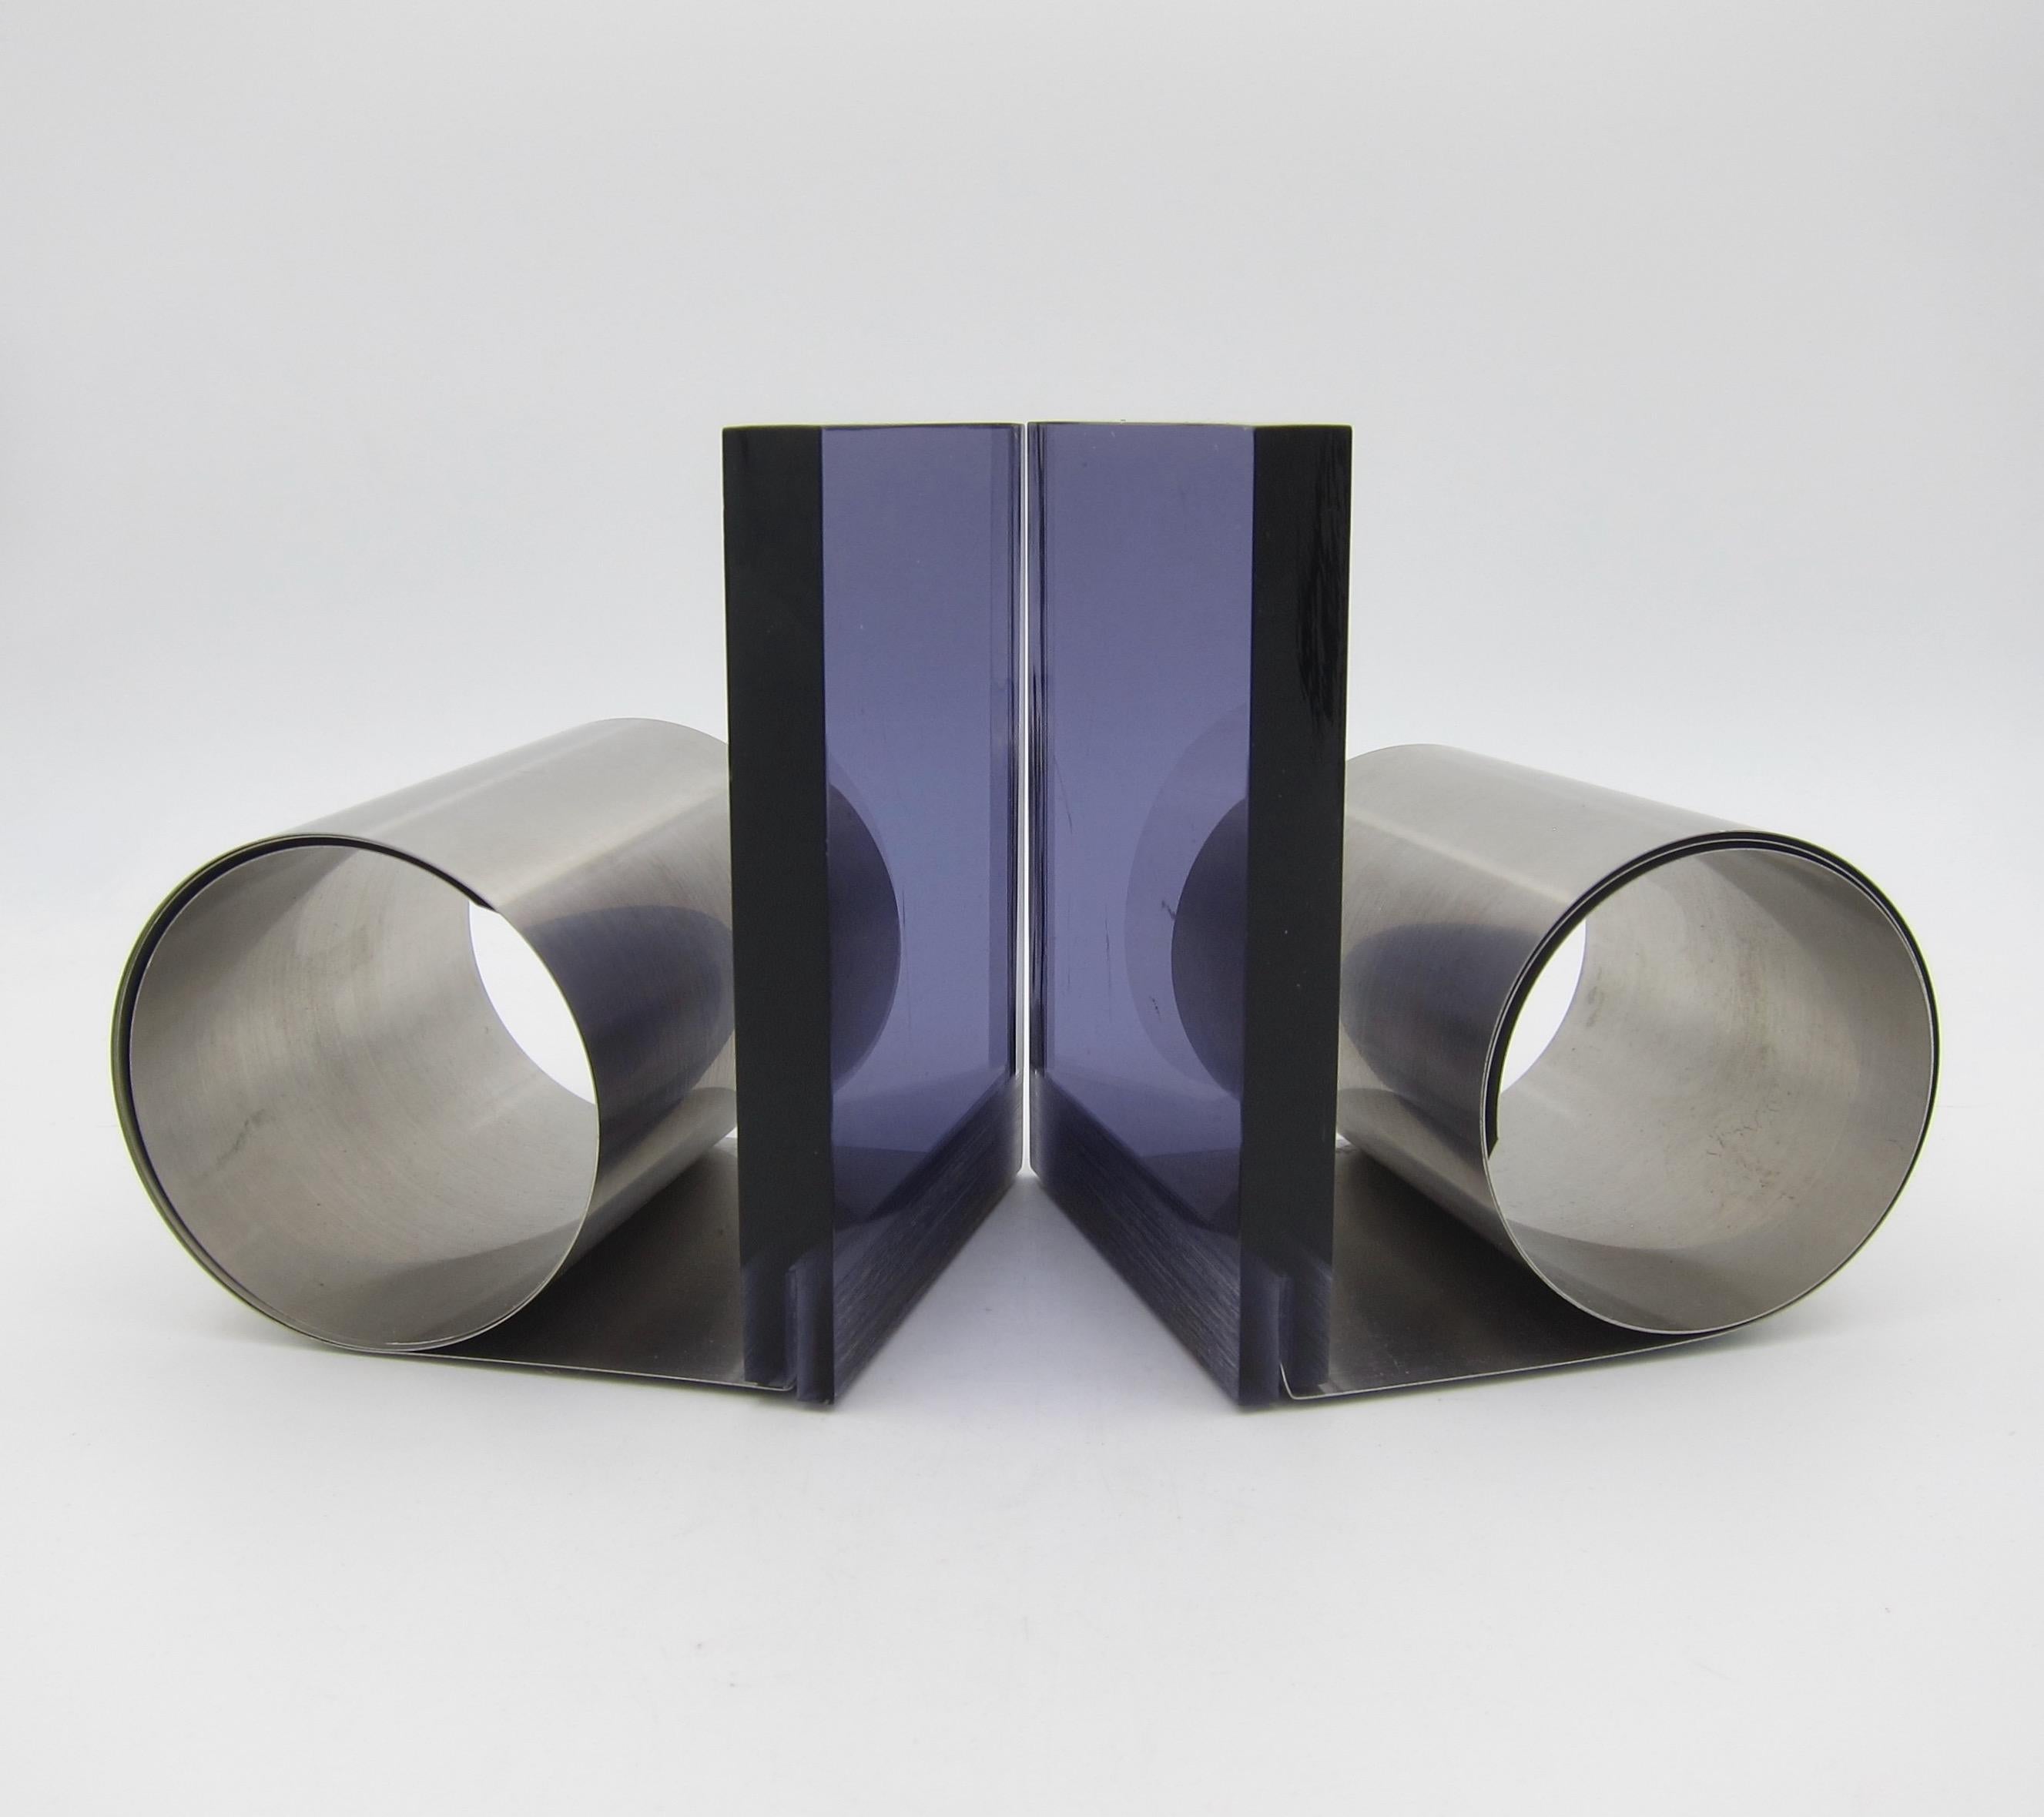 English Expanding Vintage Bookends in Purple Lucite and Coiled Metal, Made in England